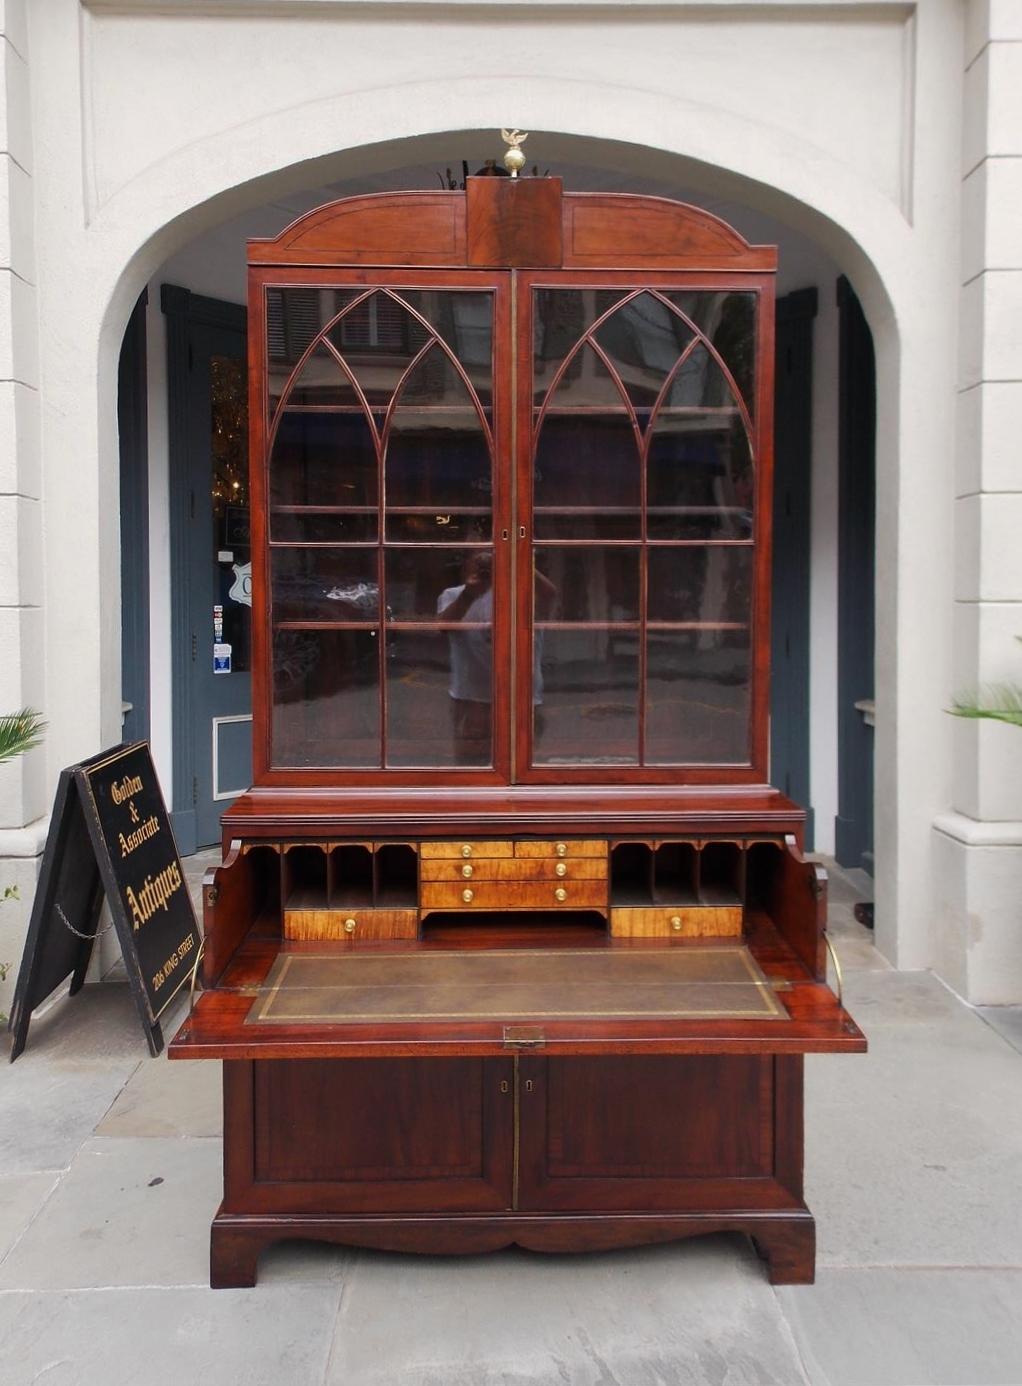 English Regency mahogany secretary with an double arched pediment, centered sphere phoenix finial, upper hinged glass bookcase revealing three interior adjustable shelves, fall front desk with Greek key tooling leather writing surface and satinwood